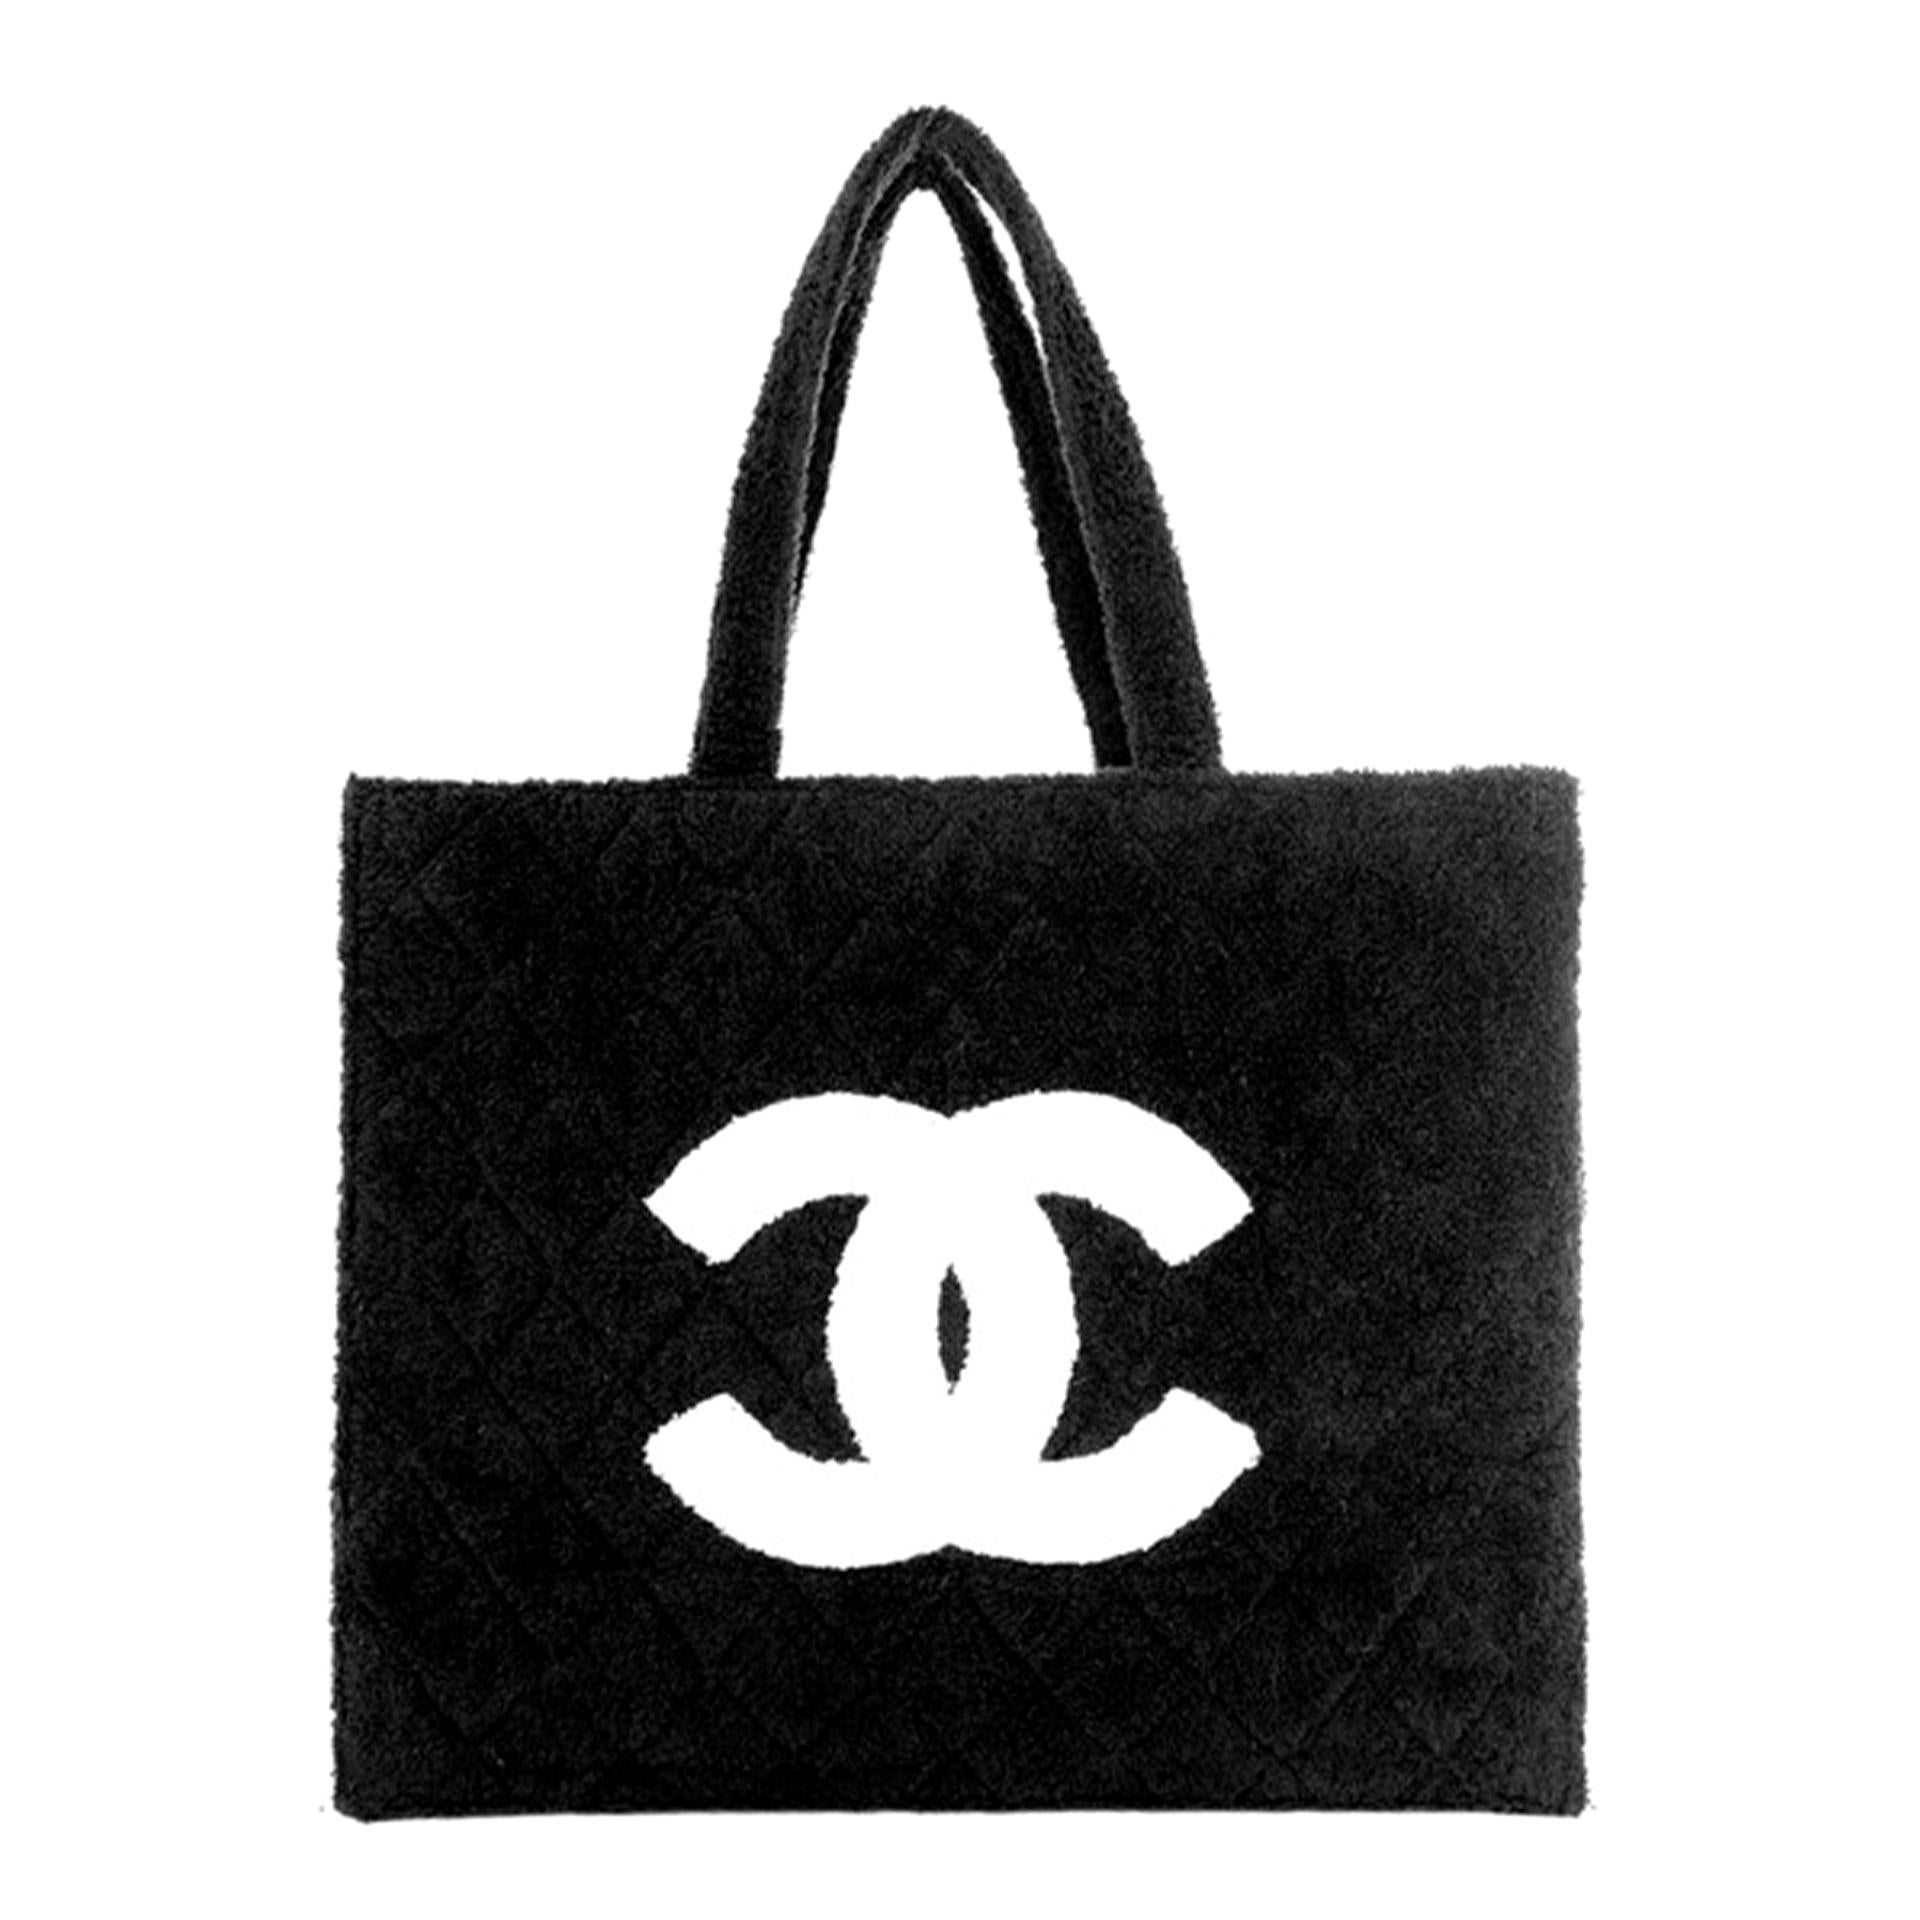 Chanel Timeless Vintage Cc Tote Towel Rare Piece Black Terry Cloth Beach Bag For Sale